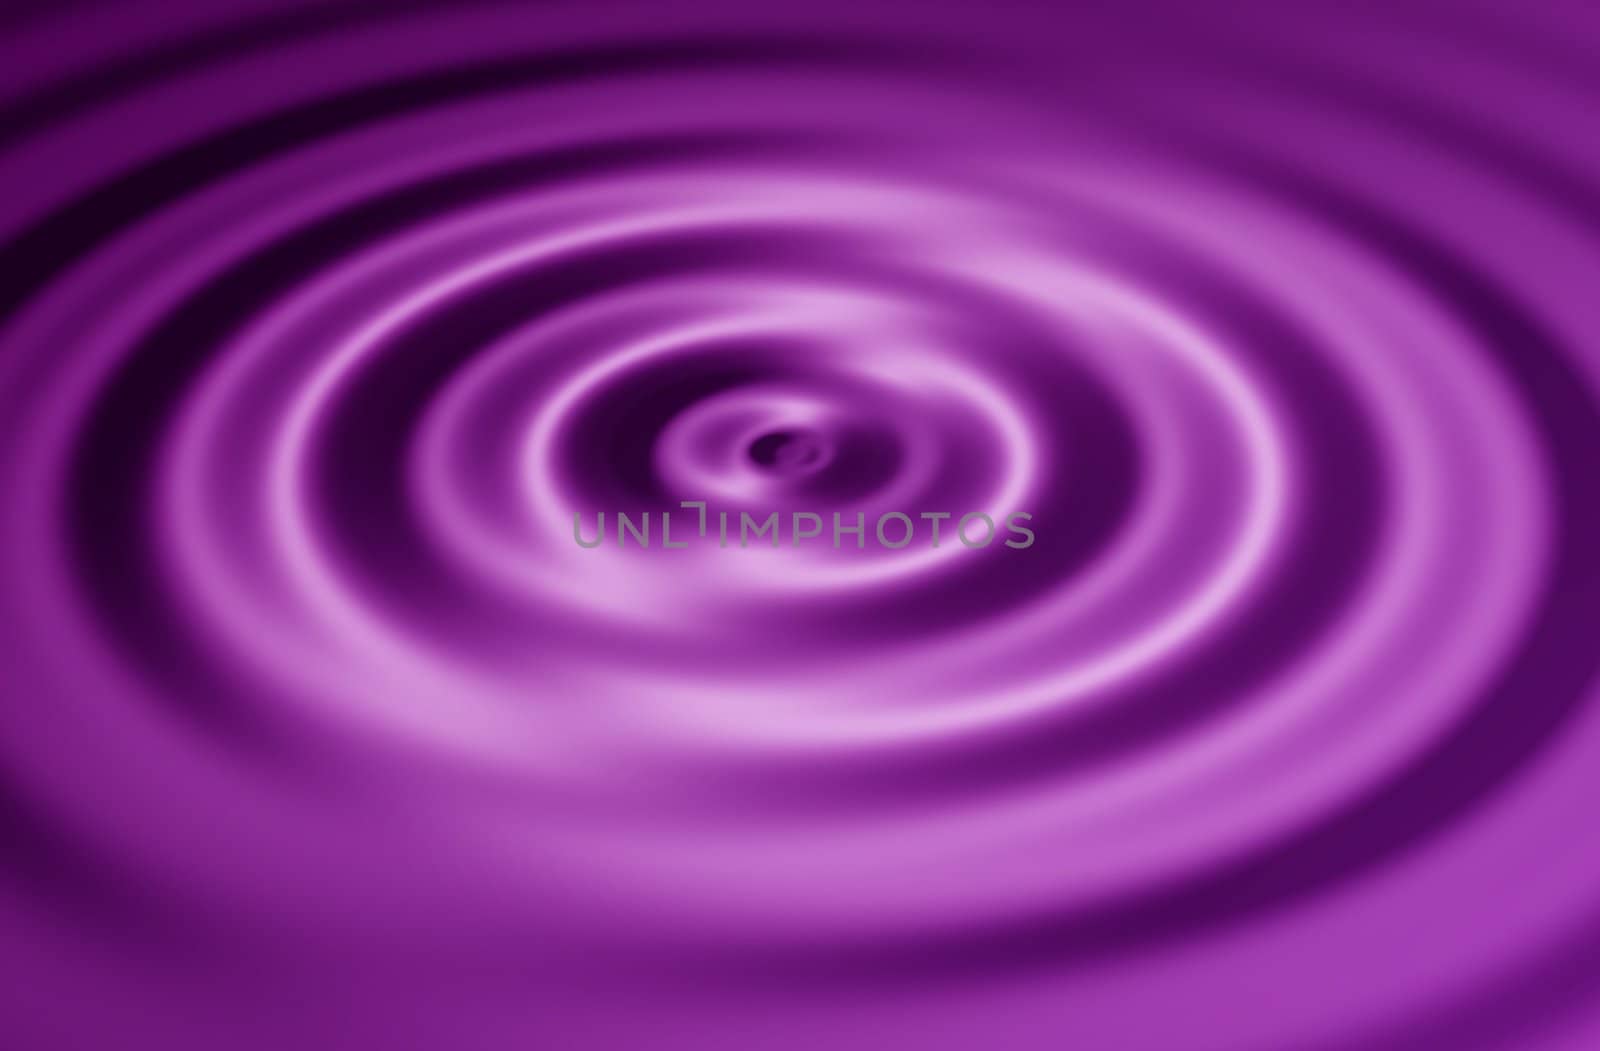 illustration showing a purple whirlpool background